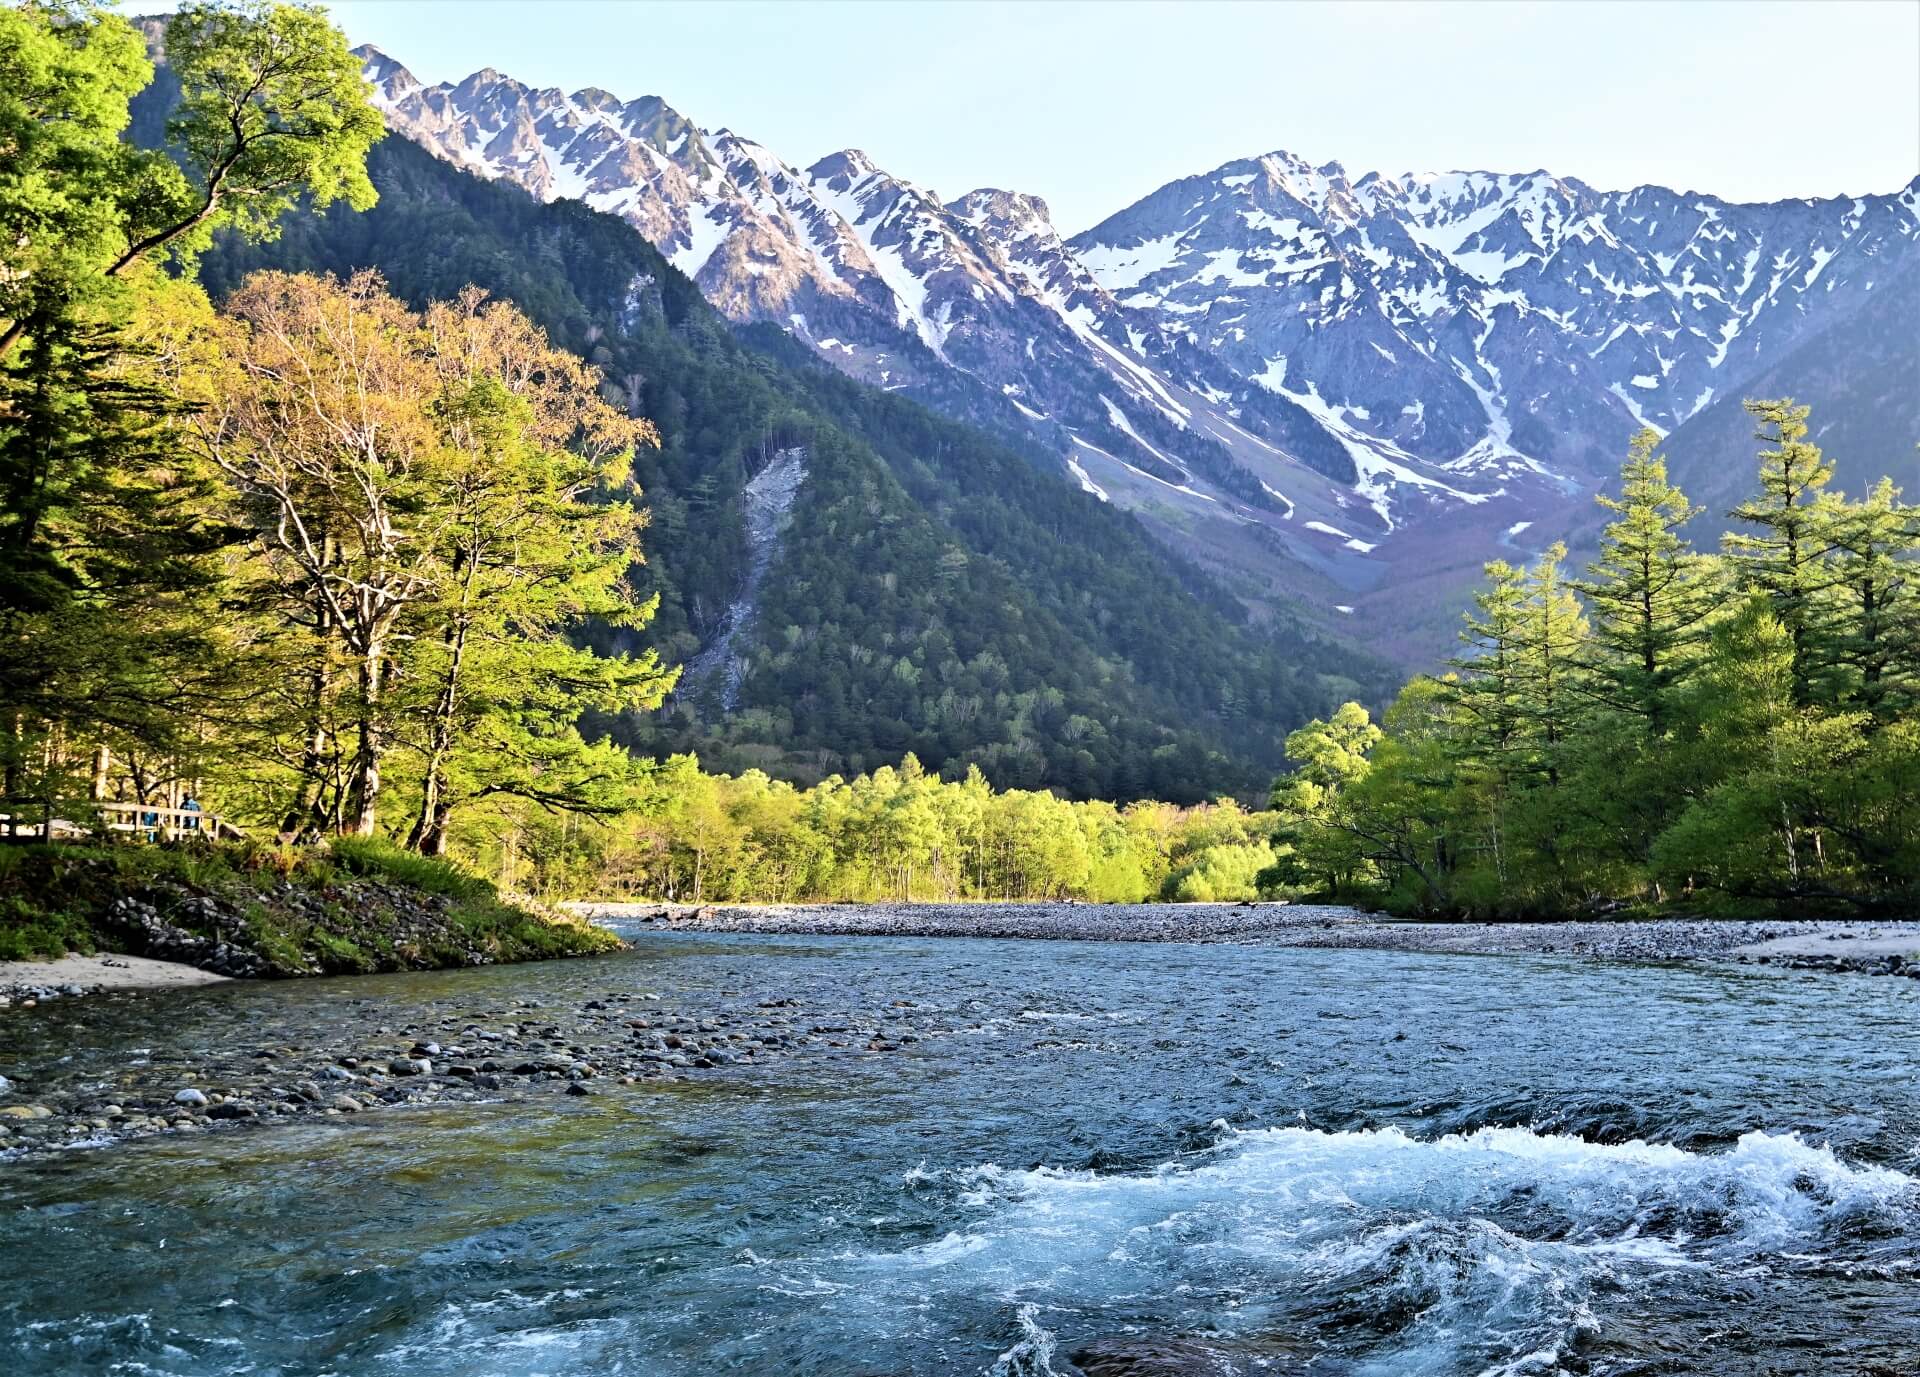 15 Things to Do in Kamikochi & Where to Stay - SNOW MONKEY RESORTS